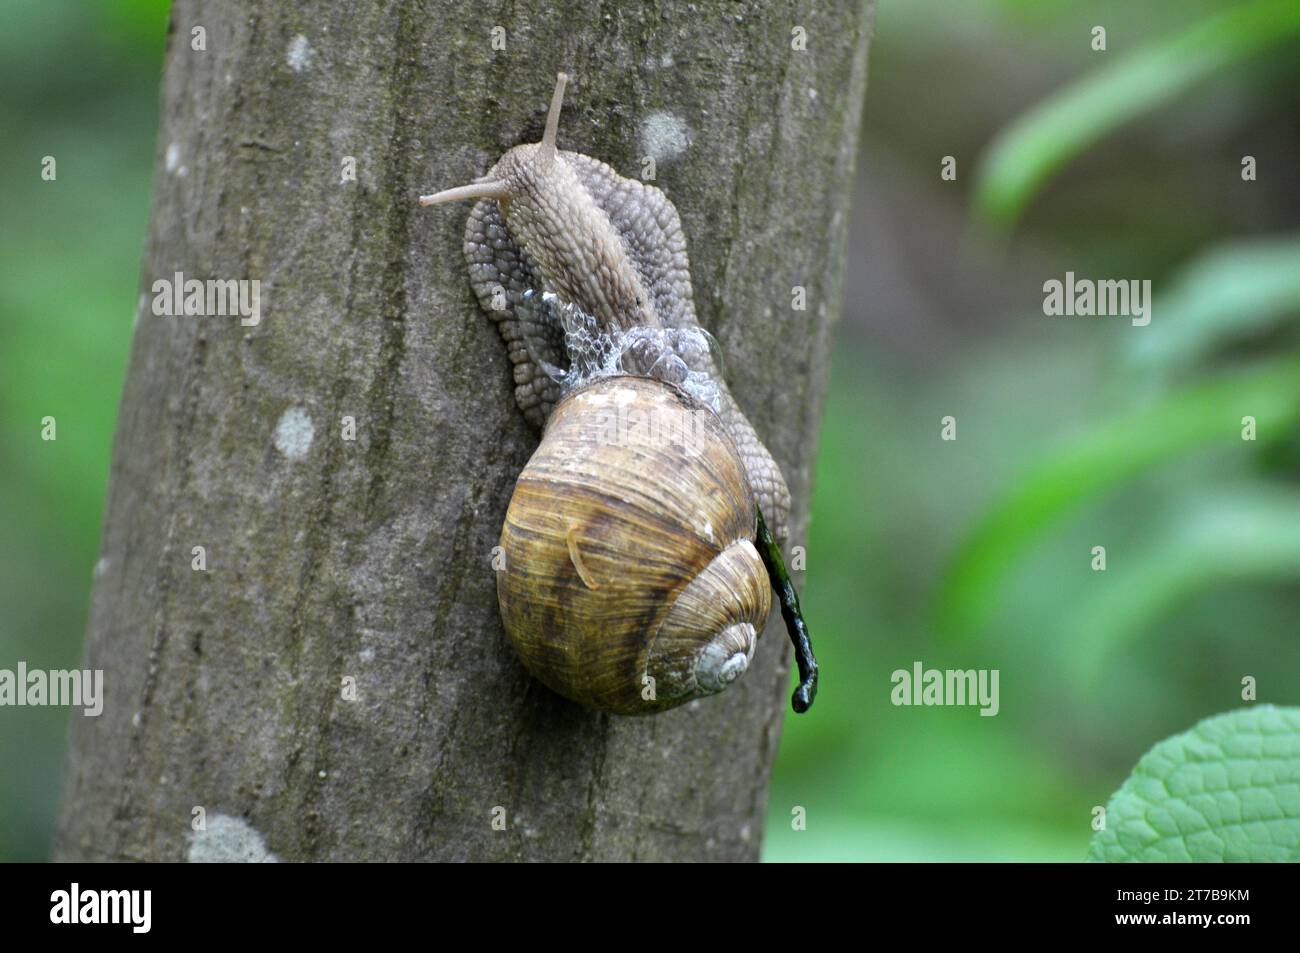 Snails of the active warm season living in the wild Stock Photo